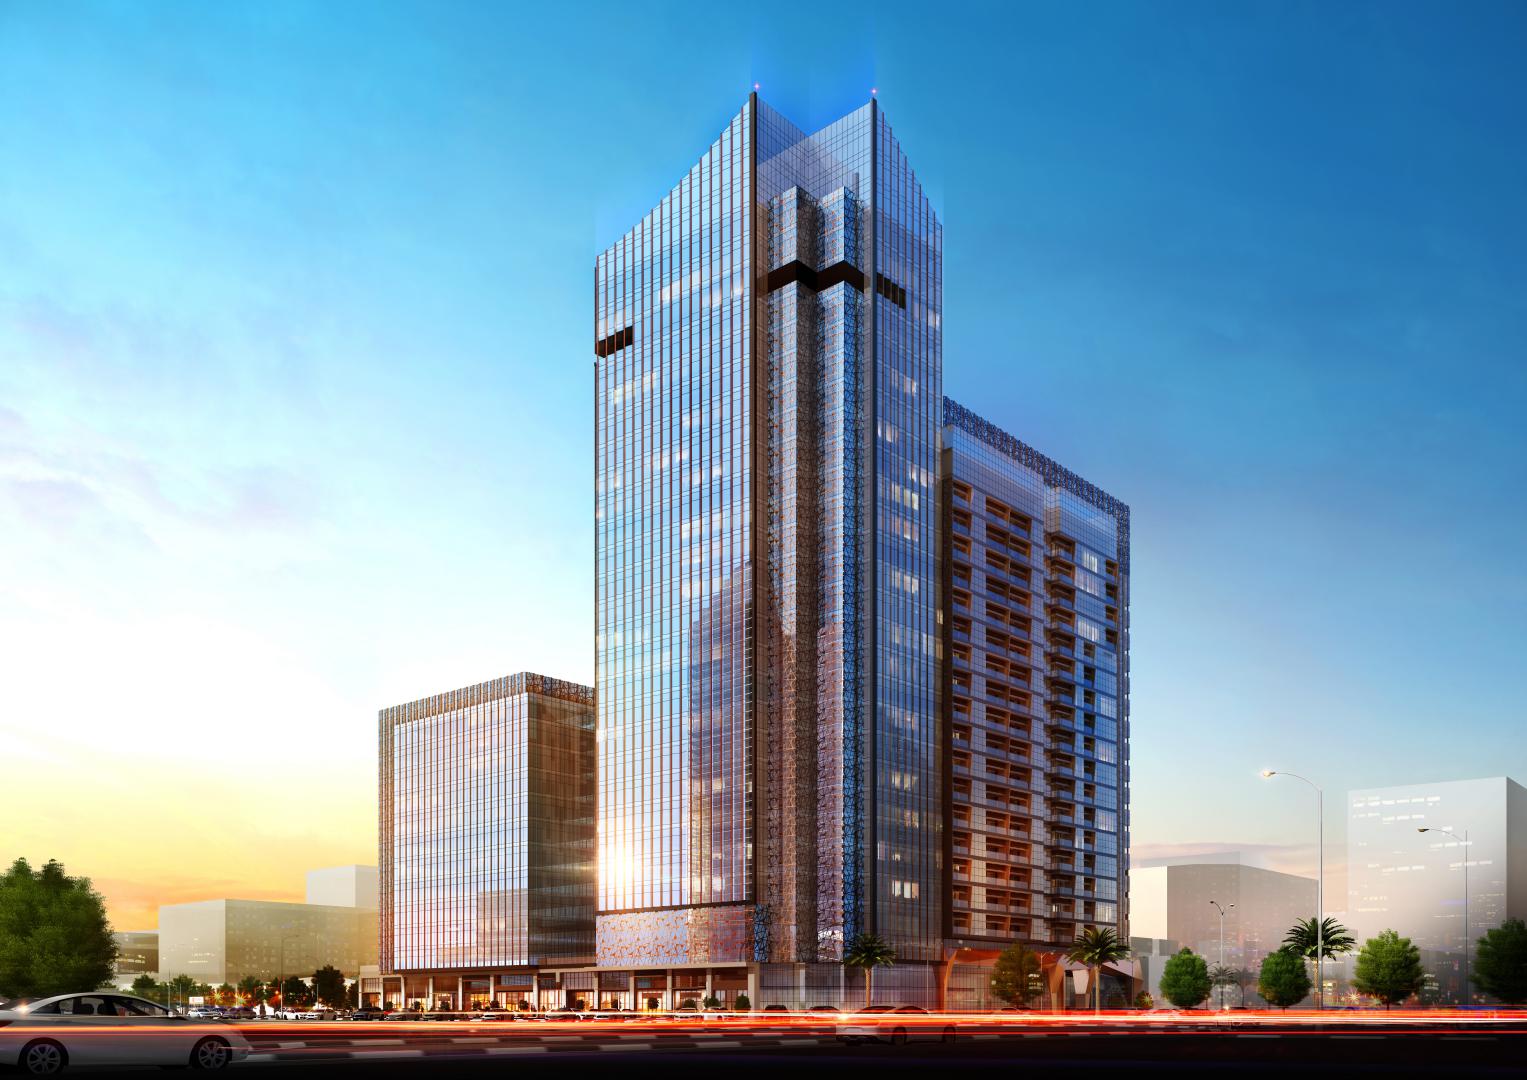 December opening for DoubleTree by Hilton Dubai M Square Hotel